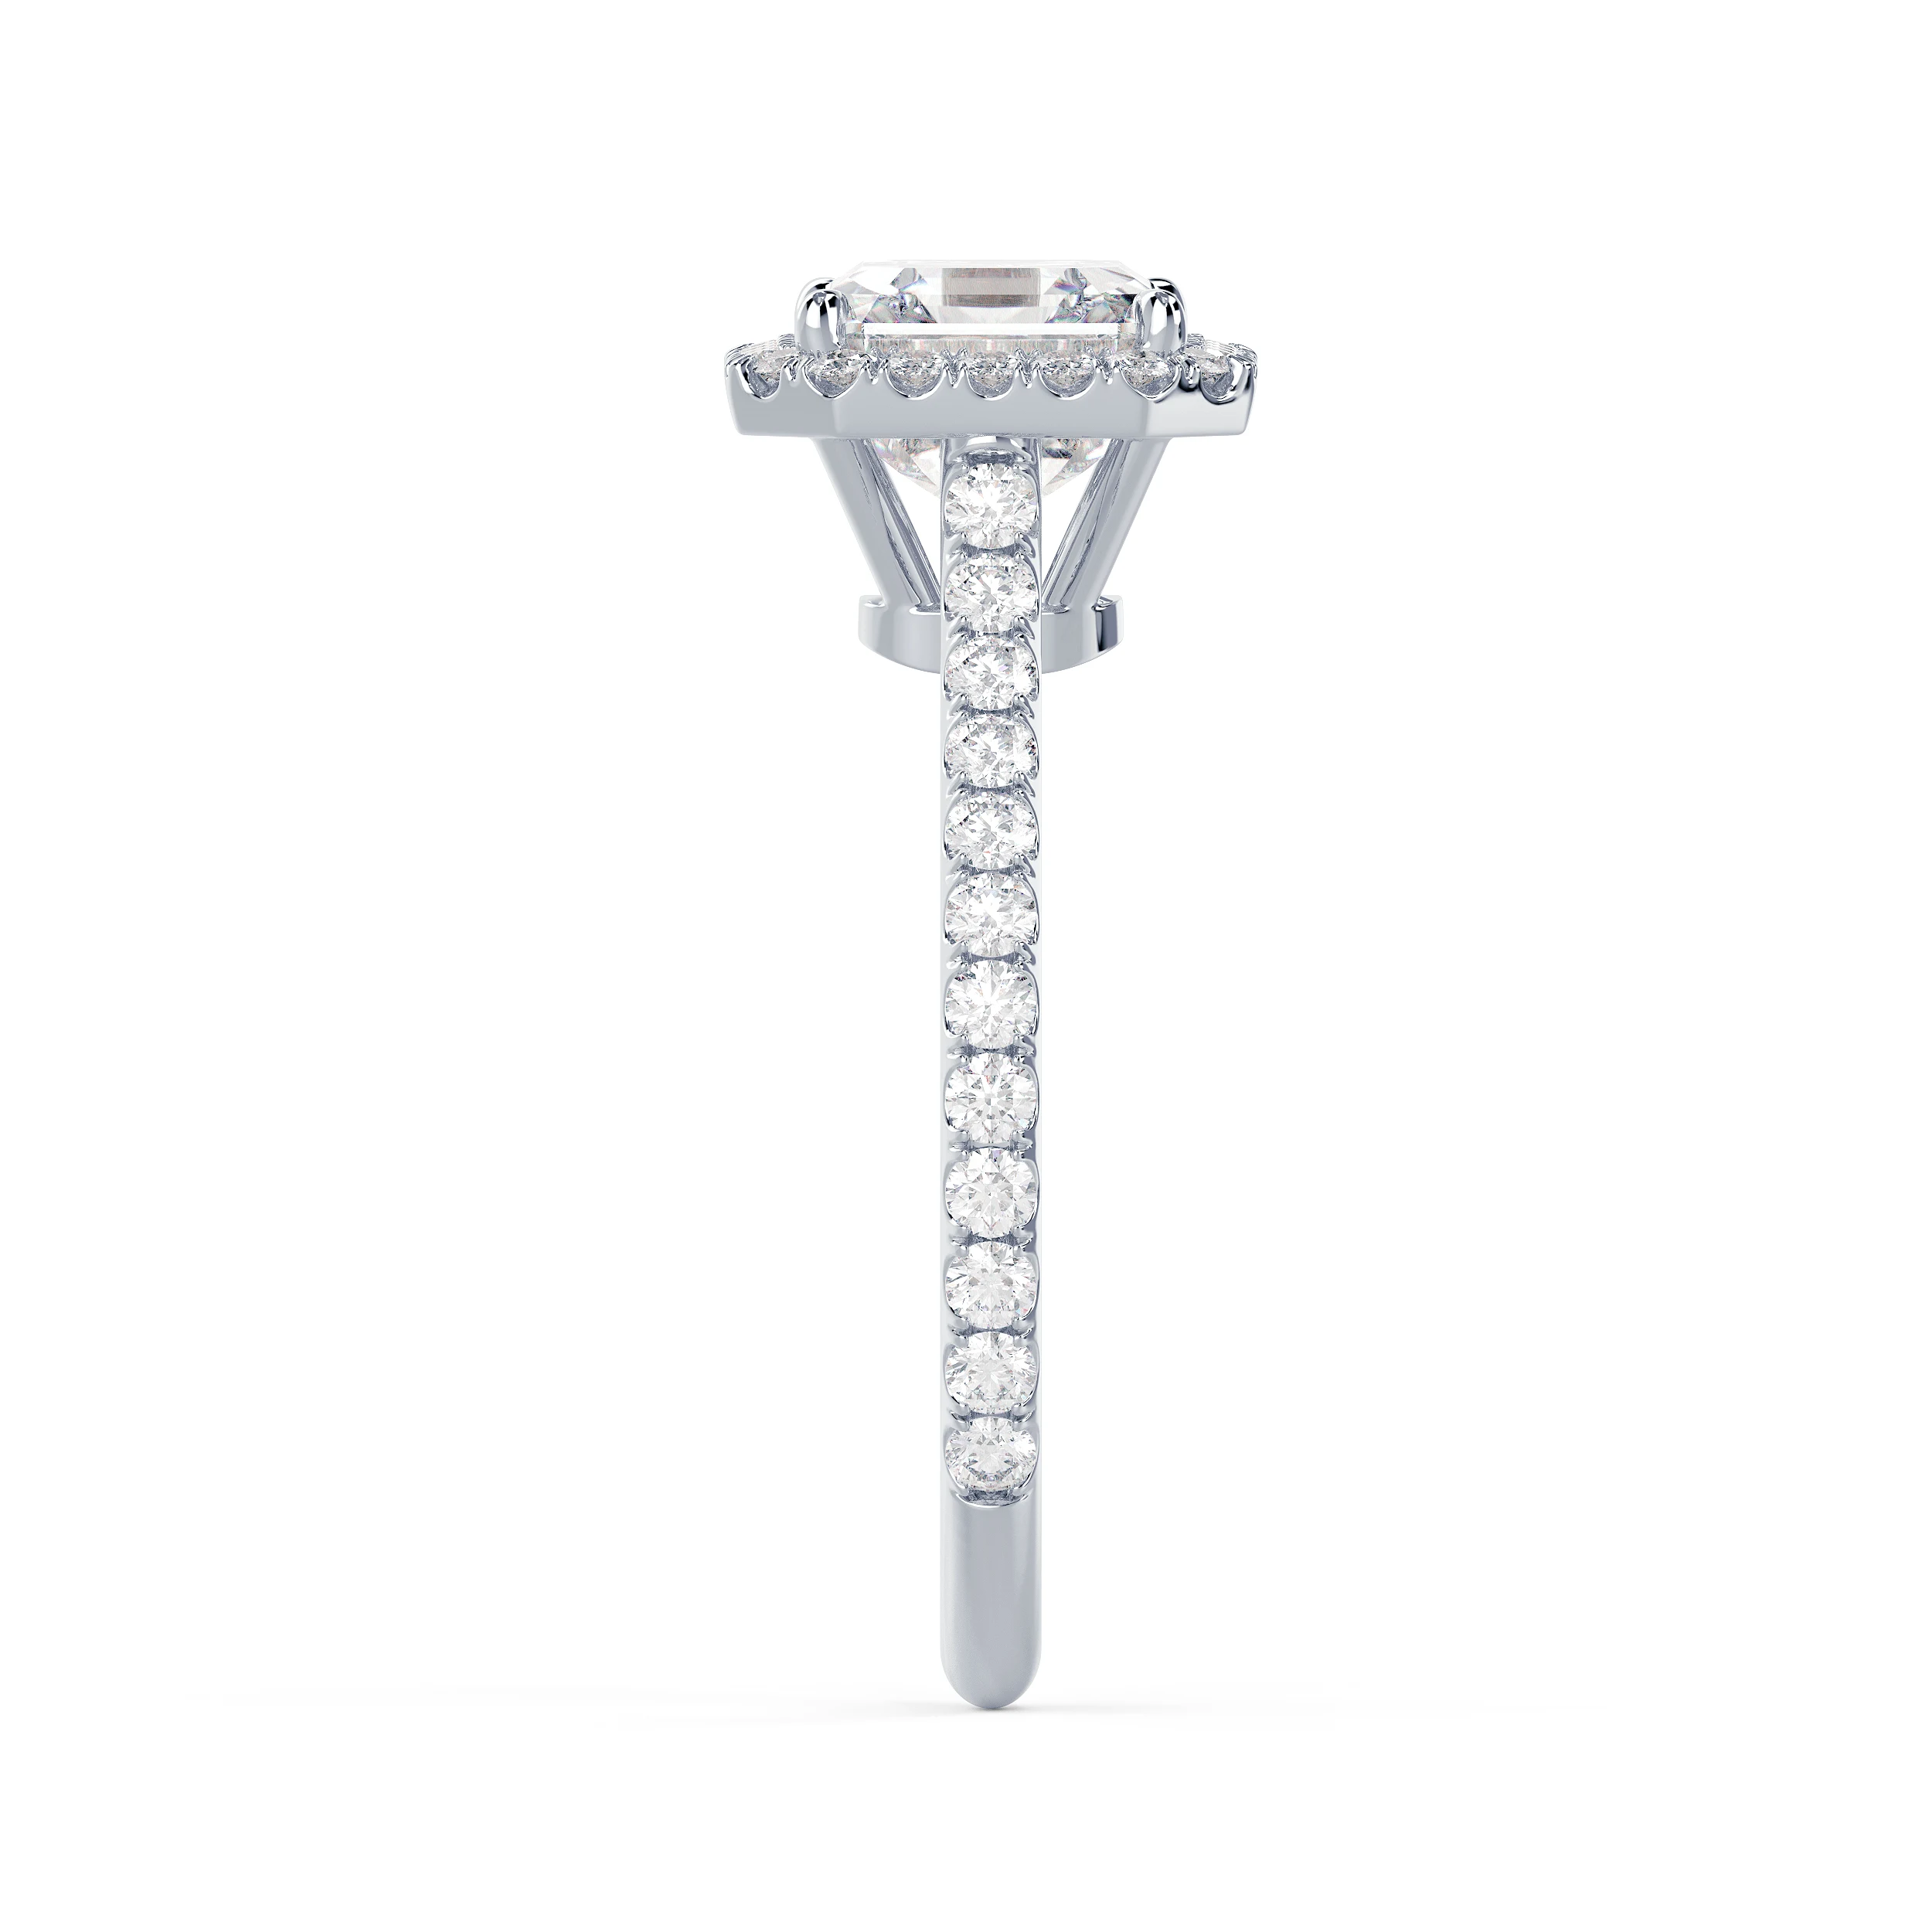 White Gold Asscher Halo Pavé Diamond Engagement Ring featuring Exceptional Quality Diamonds (Side View)